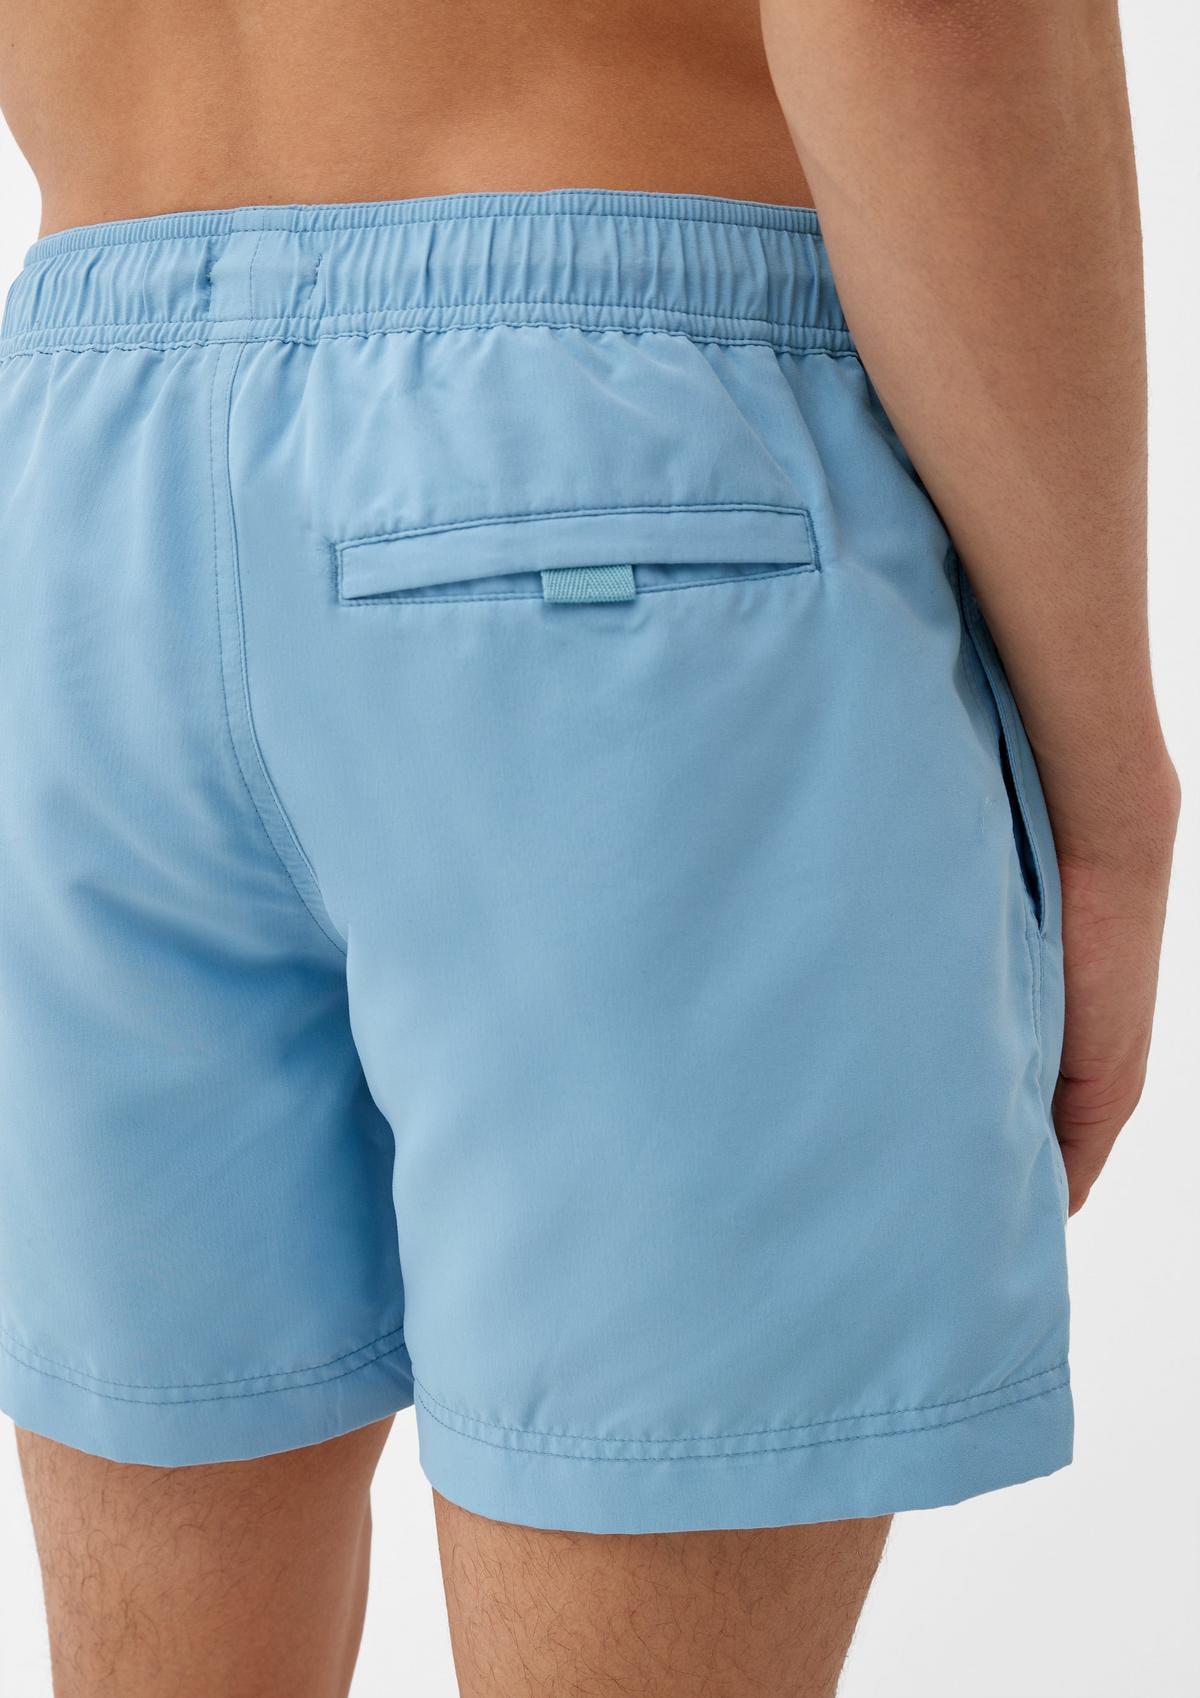 s.Oliver Badehose mit Label-Patch